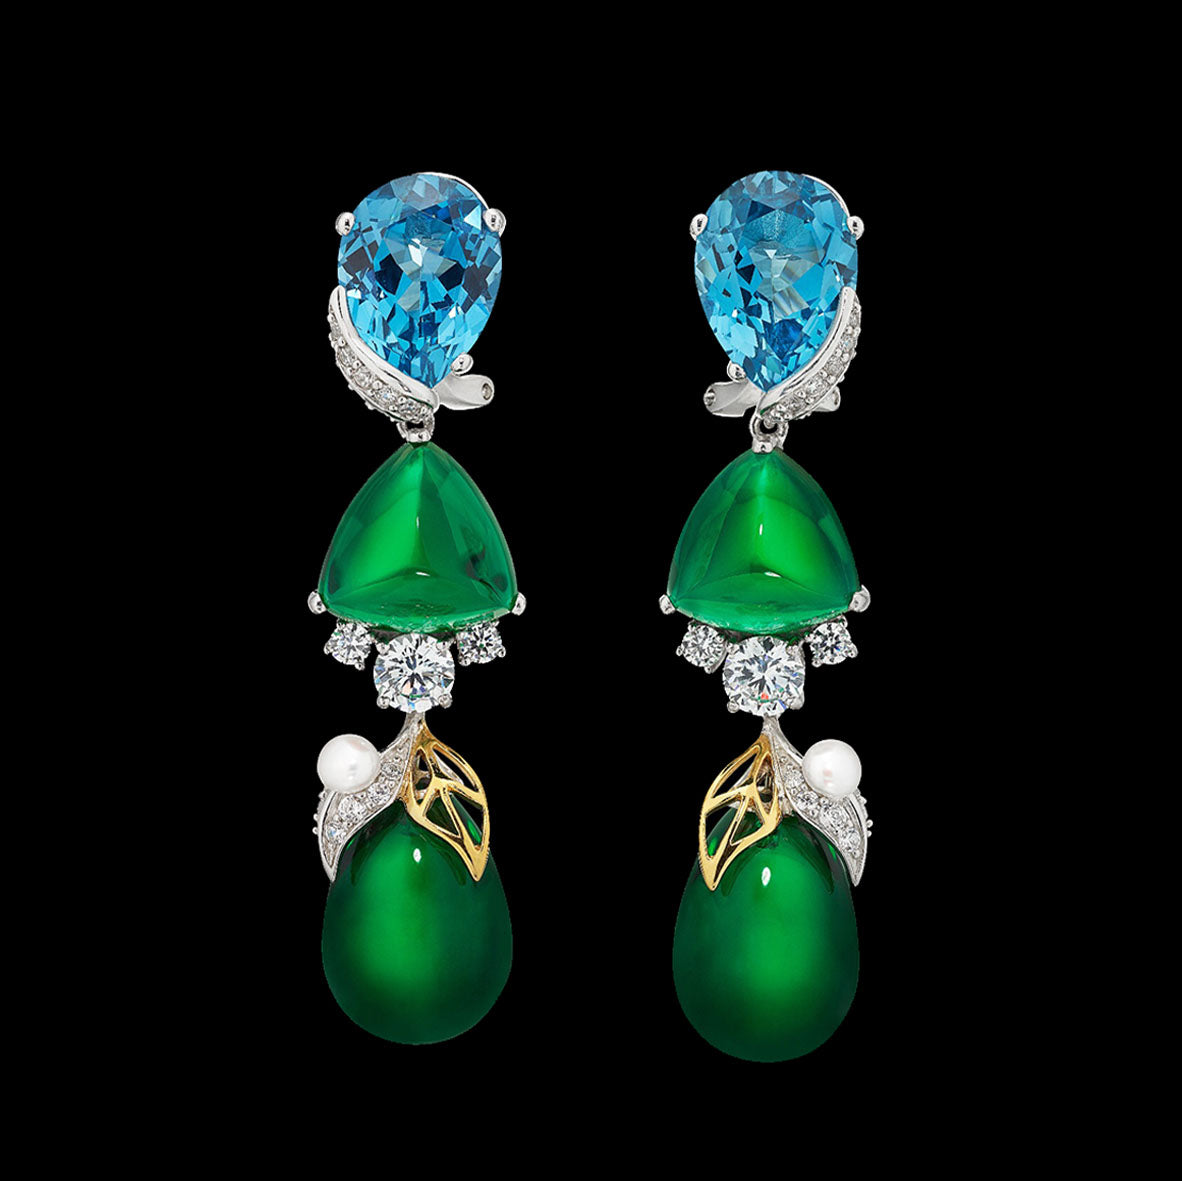 Emerald Berry Earrings, Earring, Anabela Chan Joaillerie - Fine jewelry with laboratory grown and created gemstones hand-crafted in the United Kingdom. Anabela Chan Joaillerie is the first fine jewellery brand in the world to champion laboratory-grown and created gemstones with high jewellery design, artisanal craftsmanship and a focus on ethical and sustainable innovations.